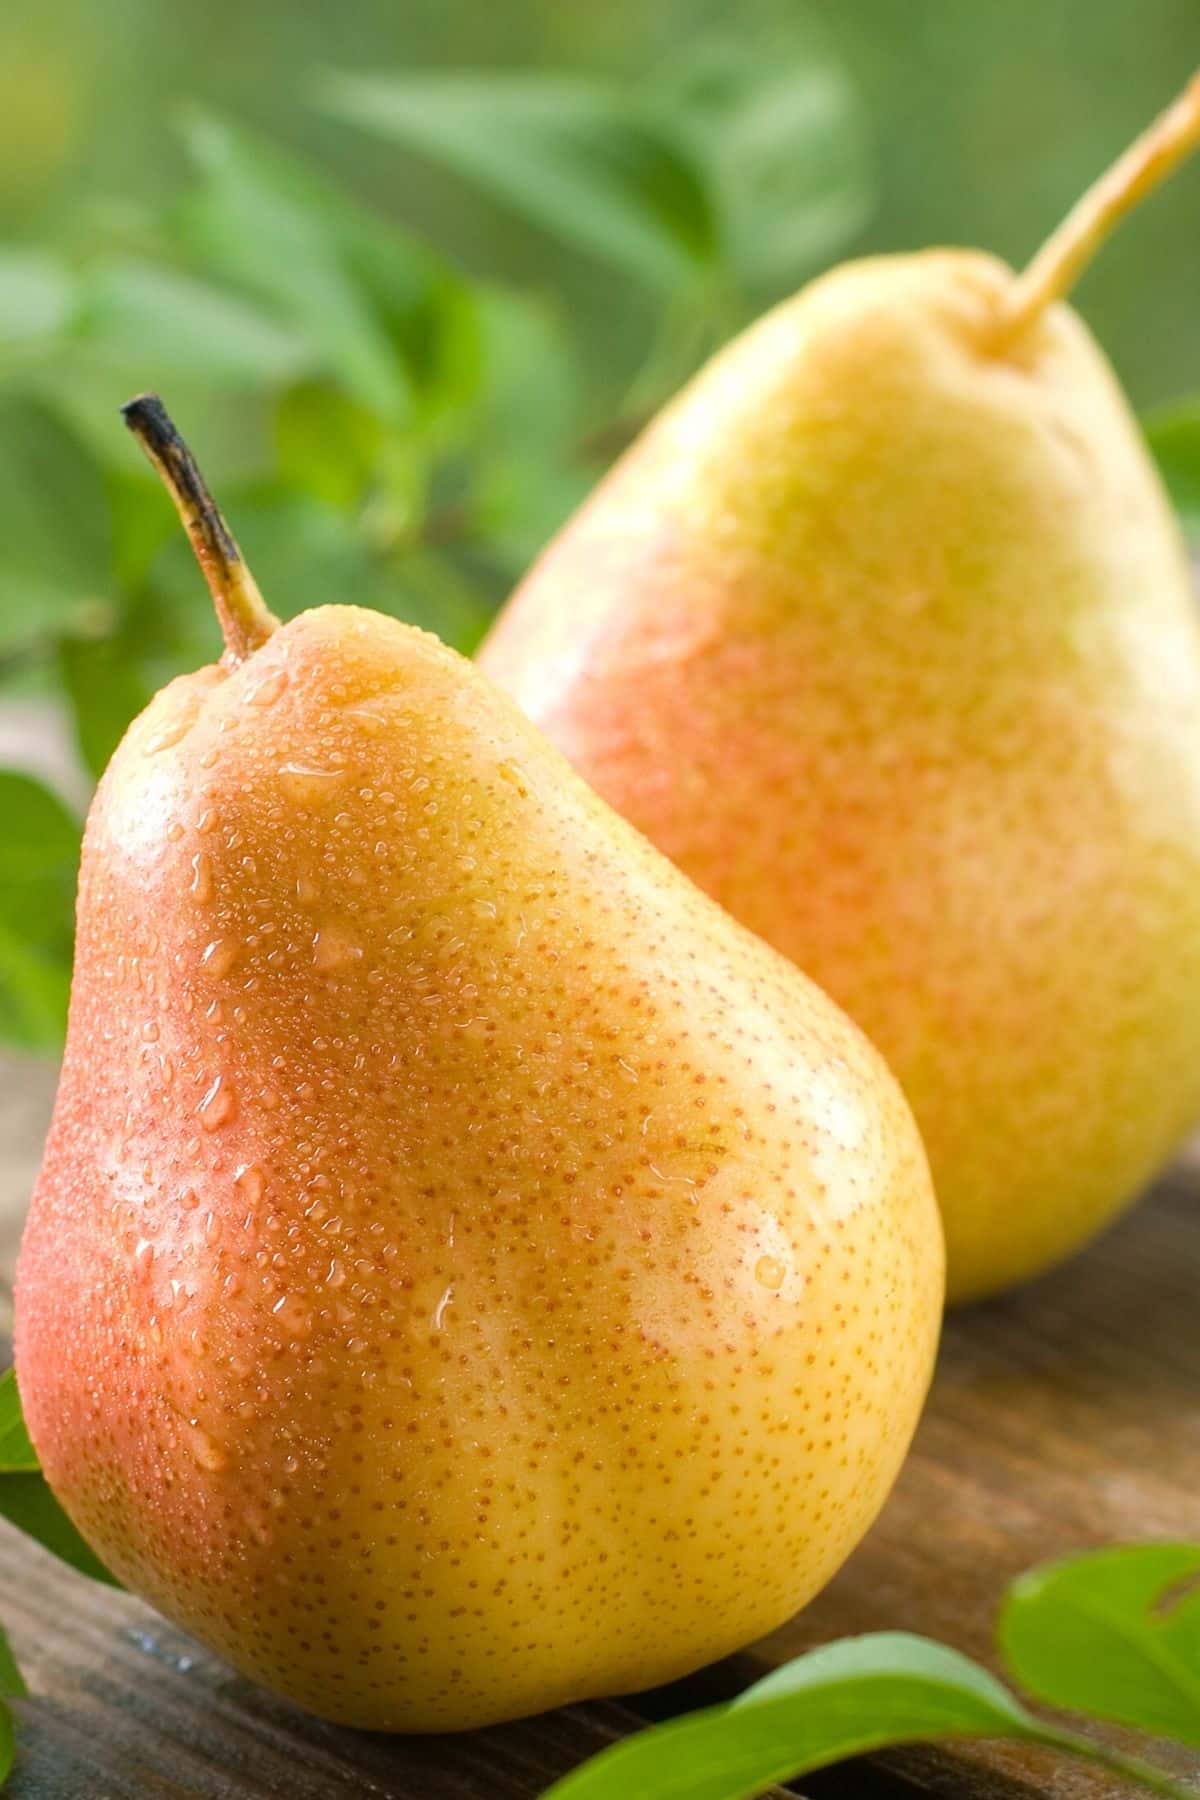 Two ripe yellow pears on a wooden table.